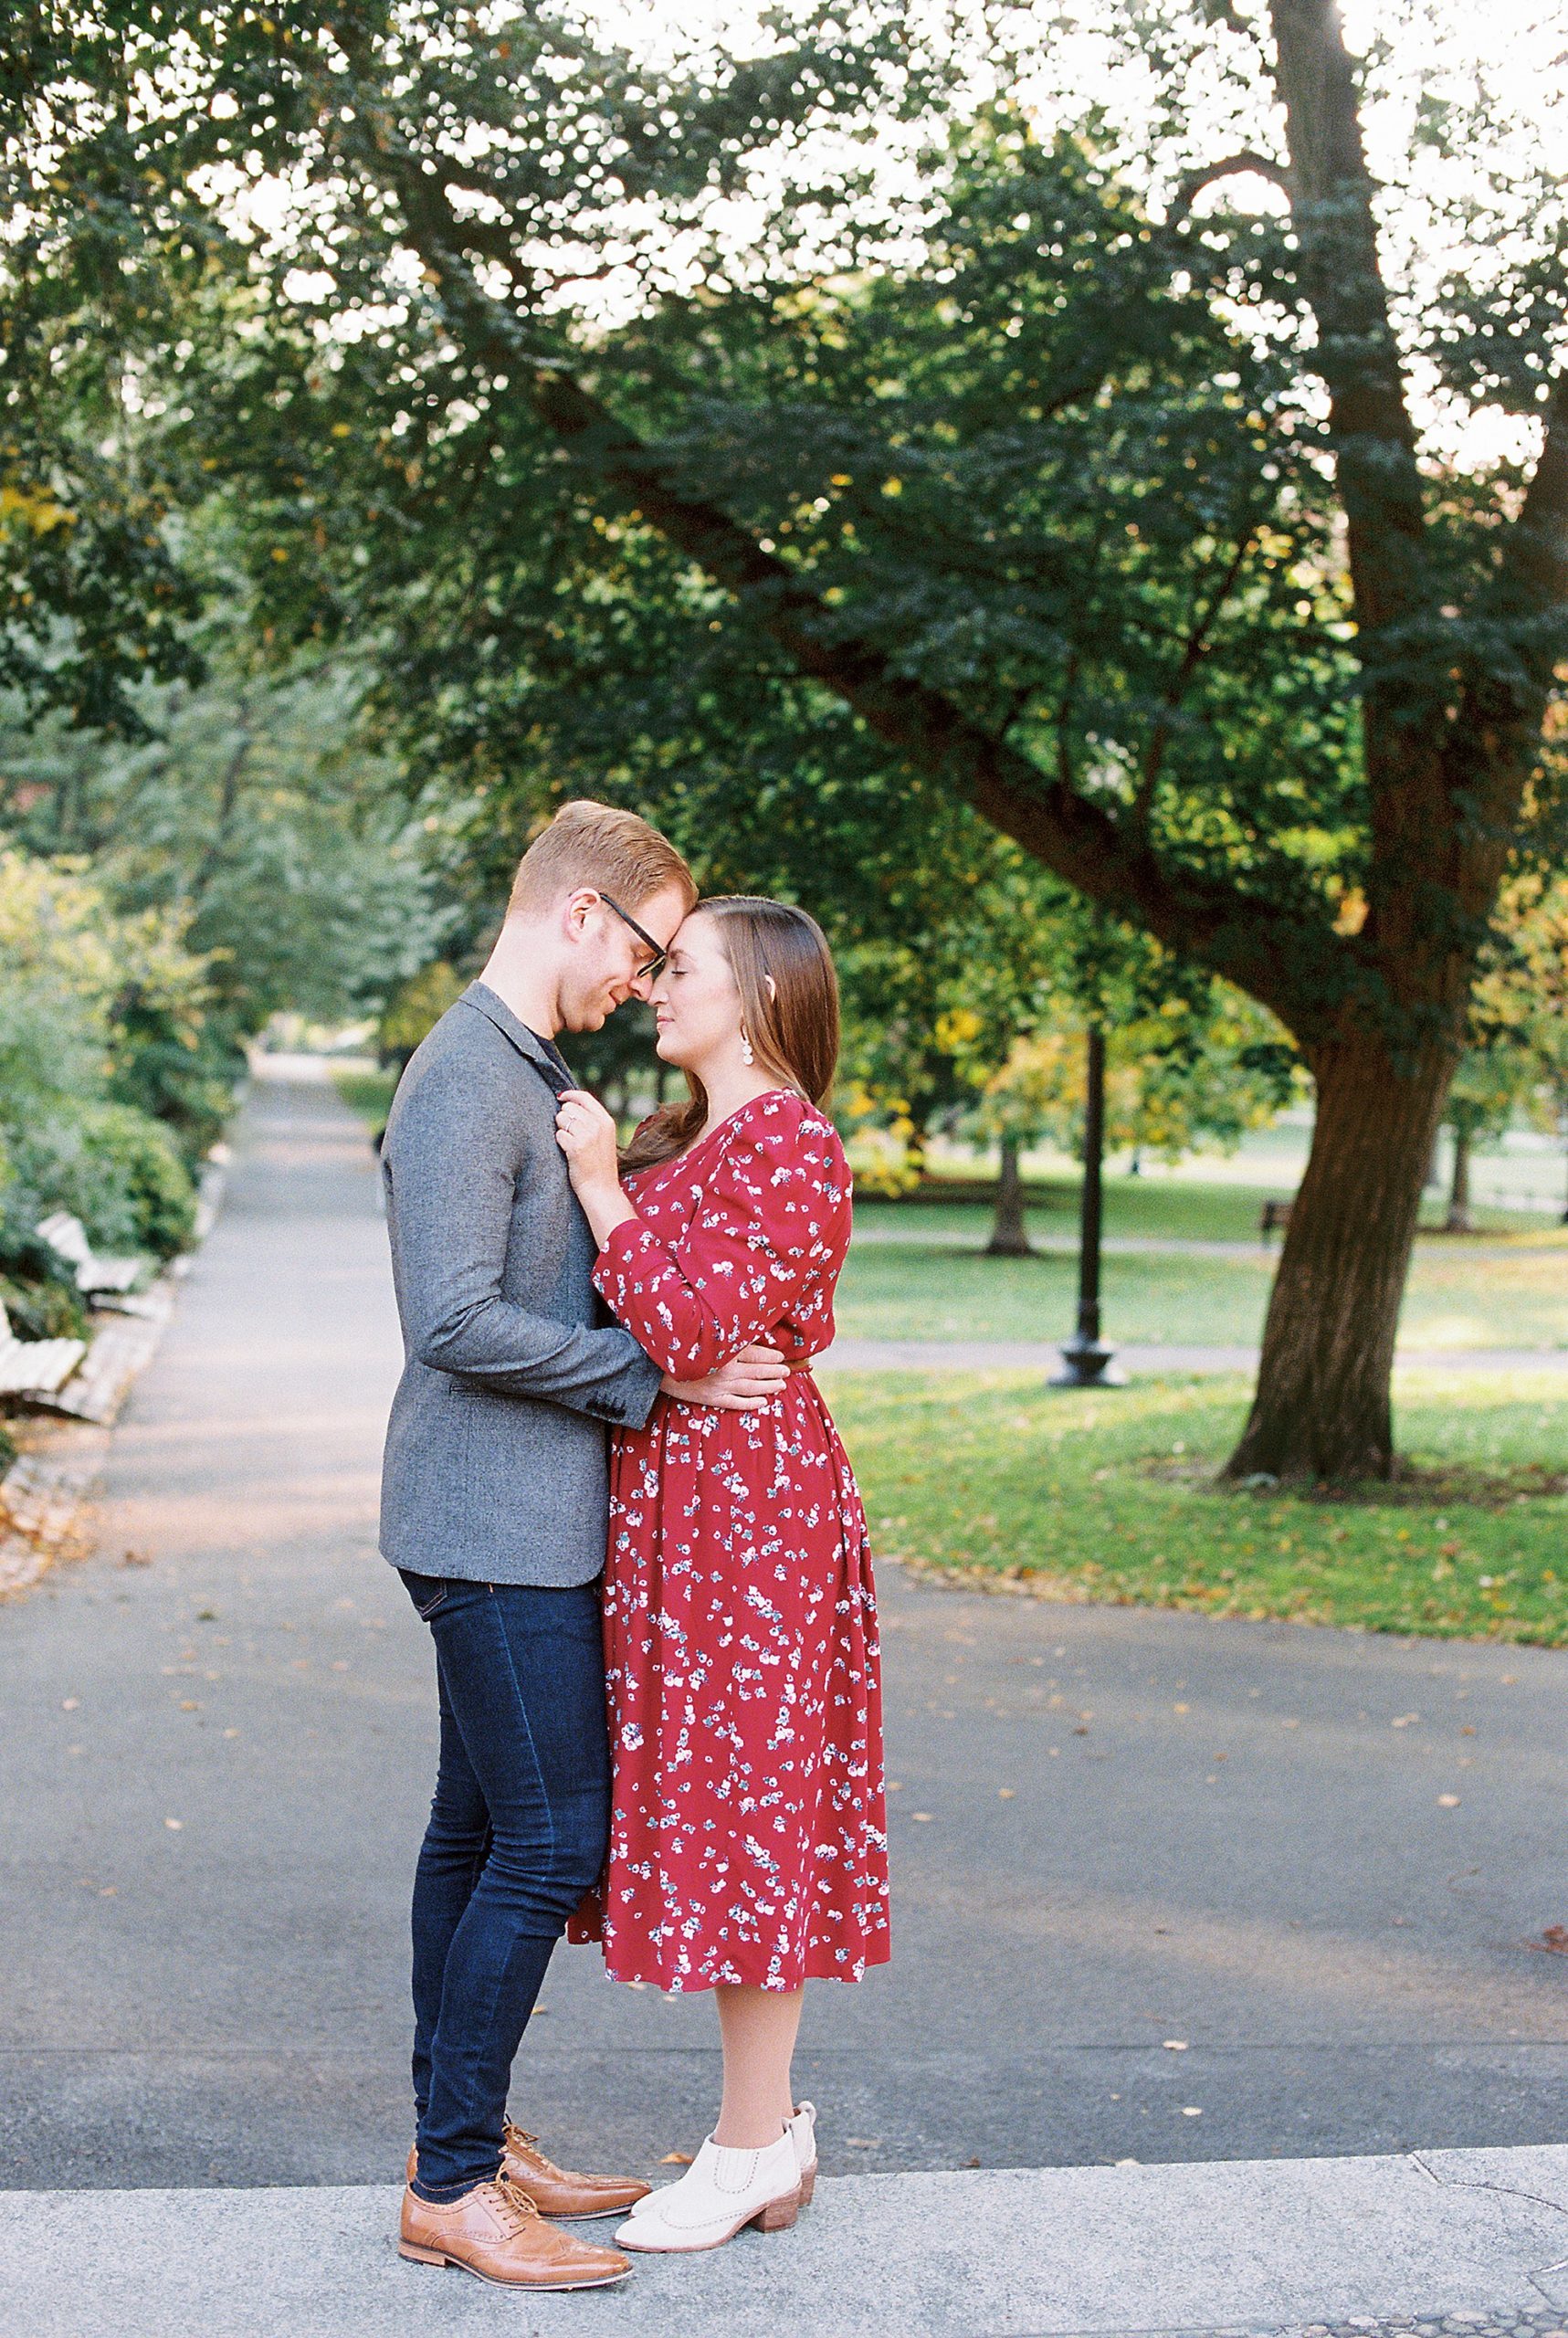 Boston Public Garden engagement session on film at sunrise Fall in New England